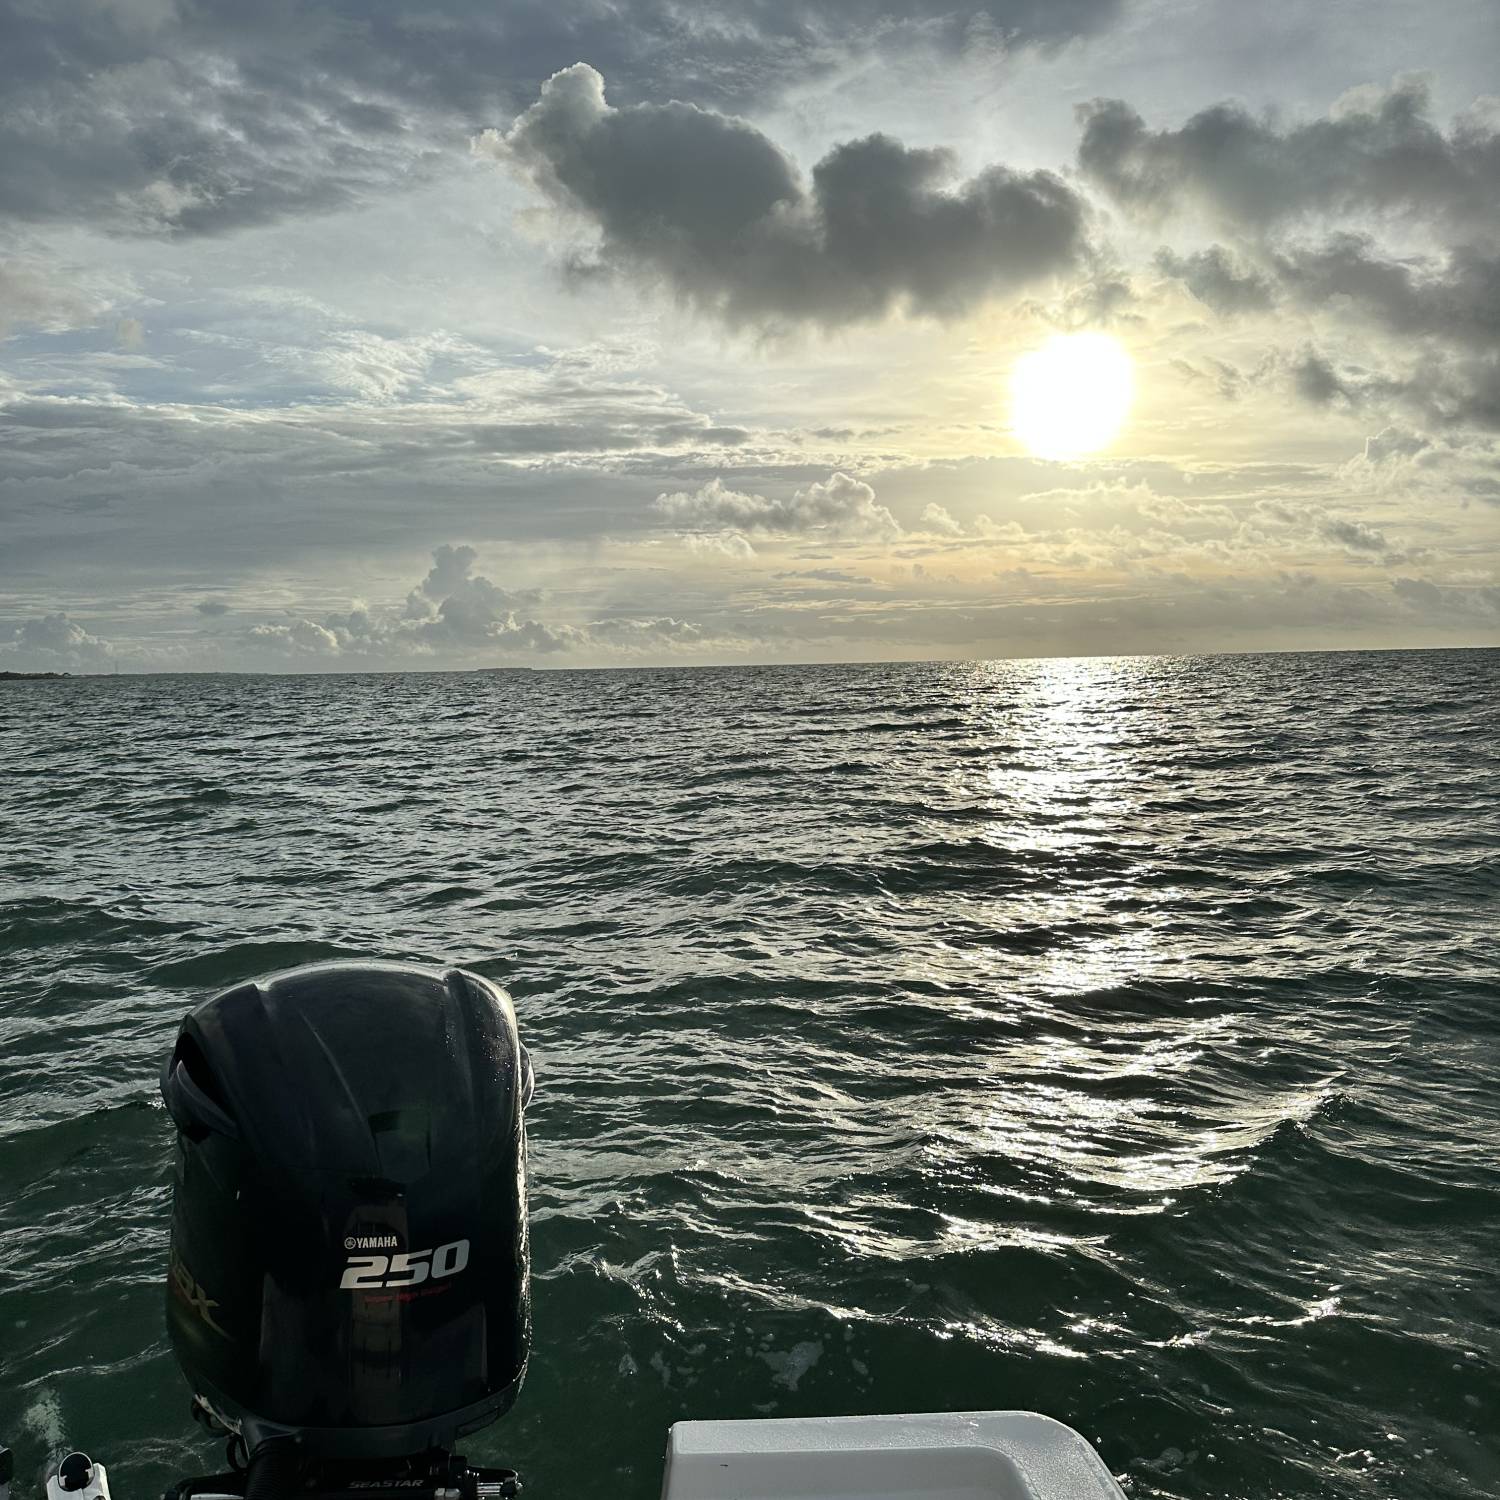 Day 1 of Spiny Lobster Season in the Florida Keys! Watched the sunrise from our 247 and eagerly...